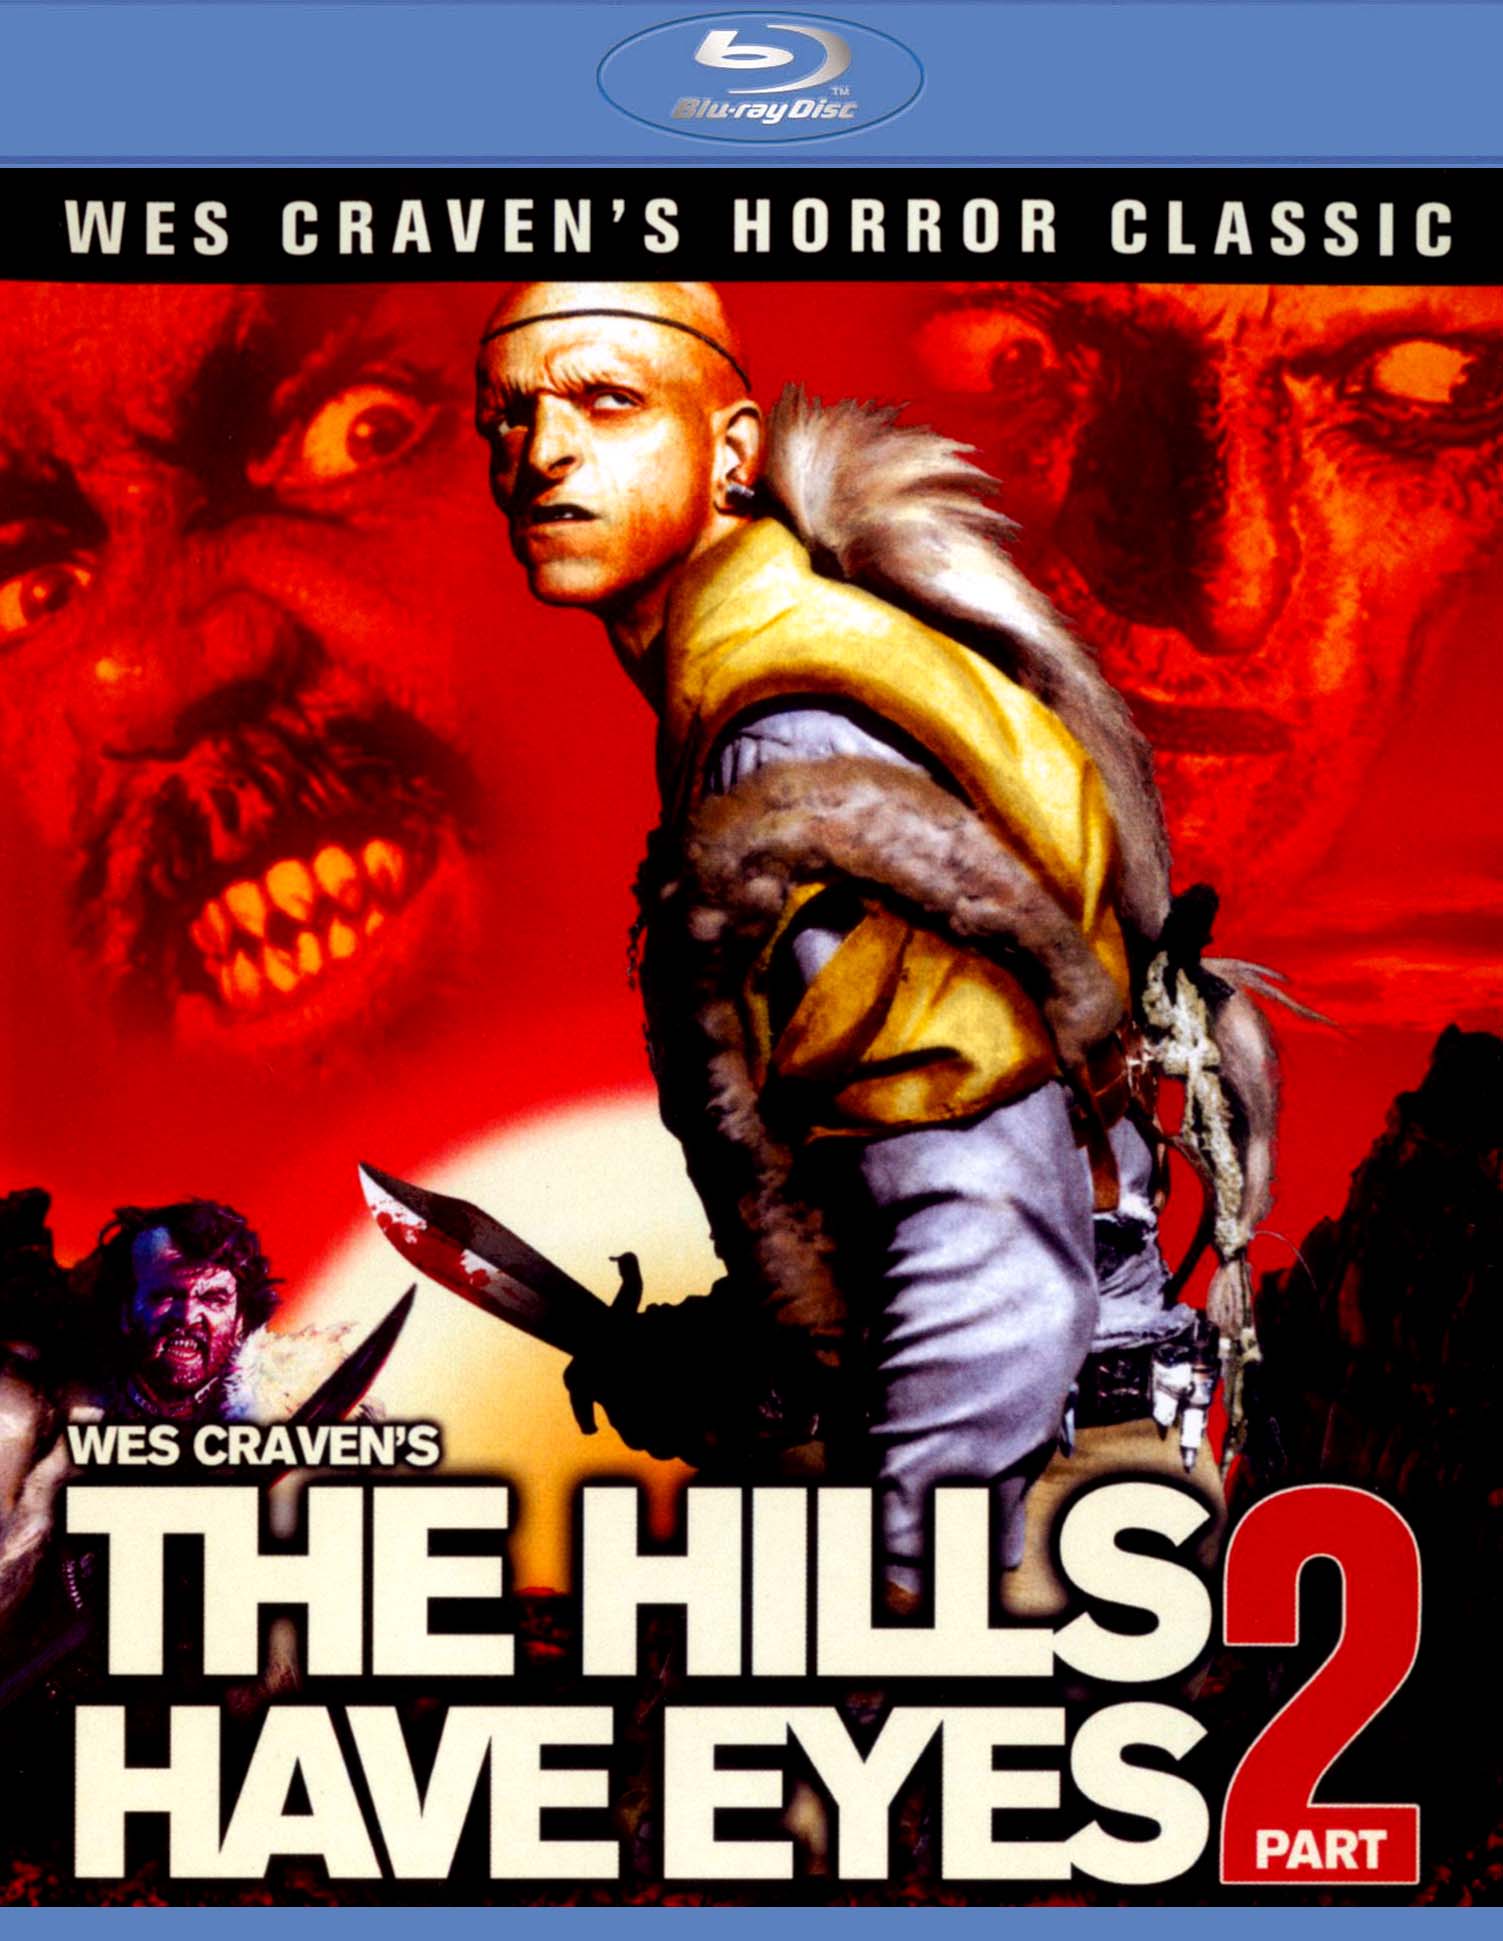 The Hills Have Eyes, Part 2 [Blu-ray] [1984] - Best Buy